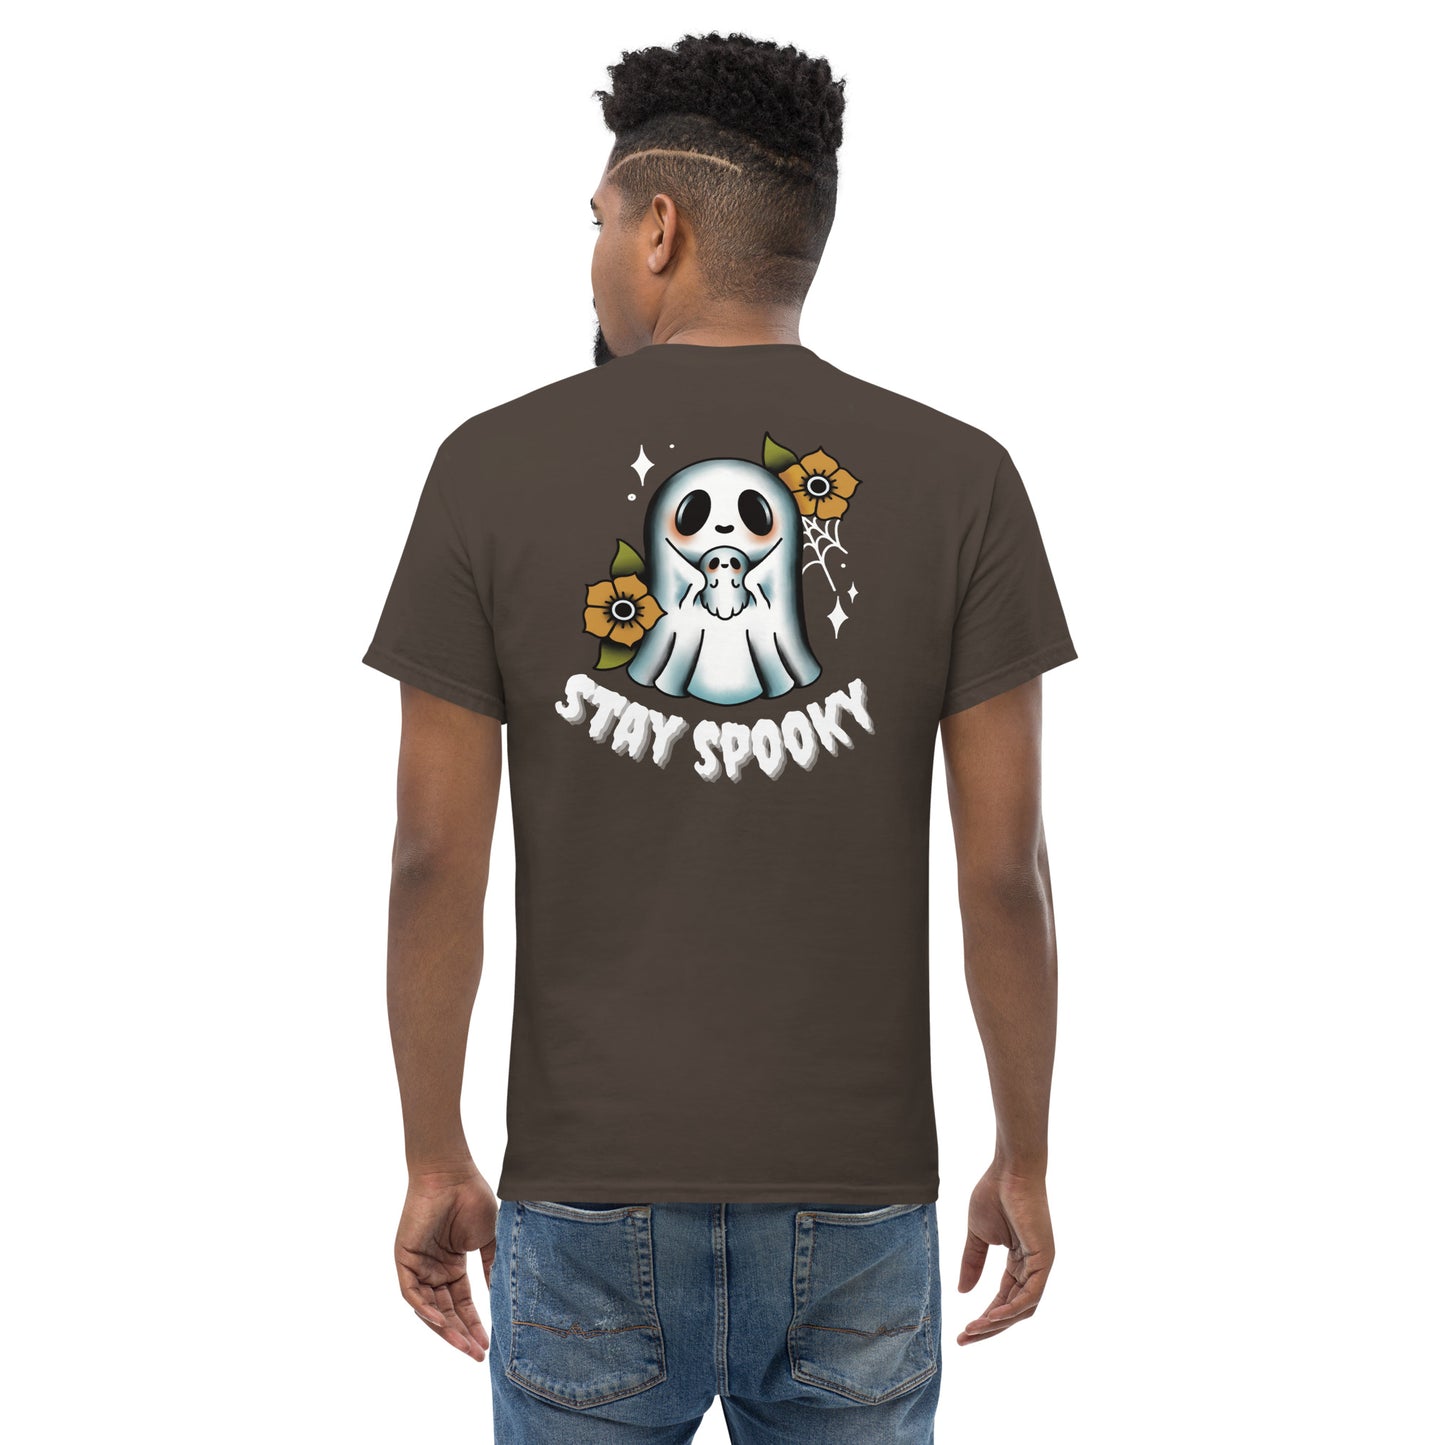 Stay Spooky classic tee